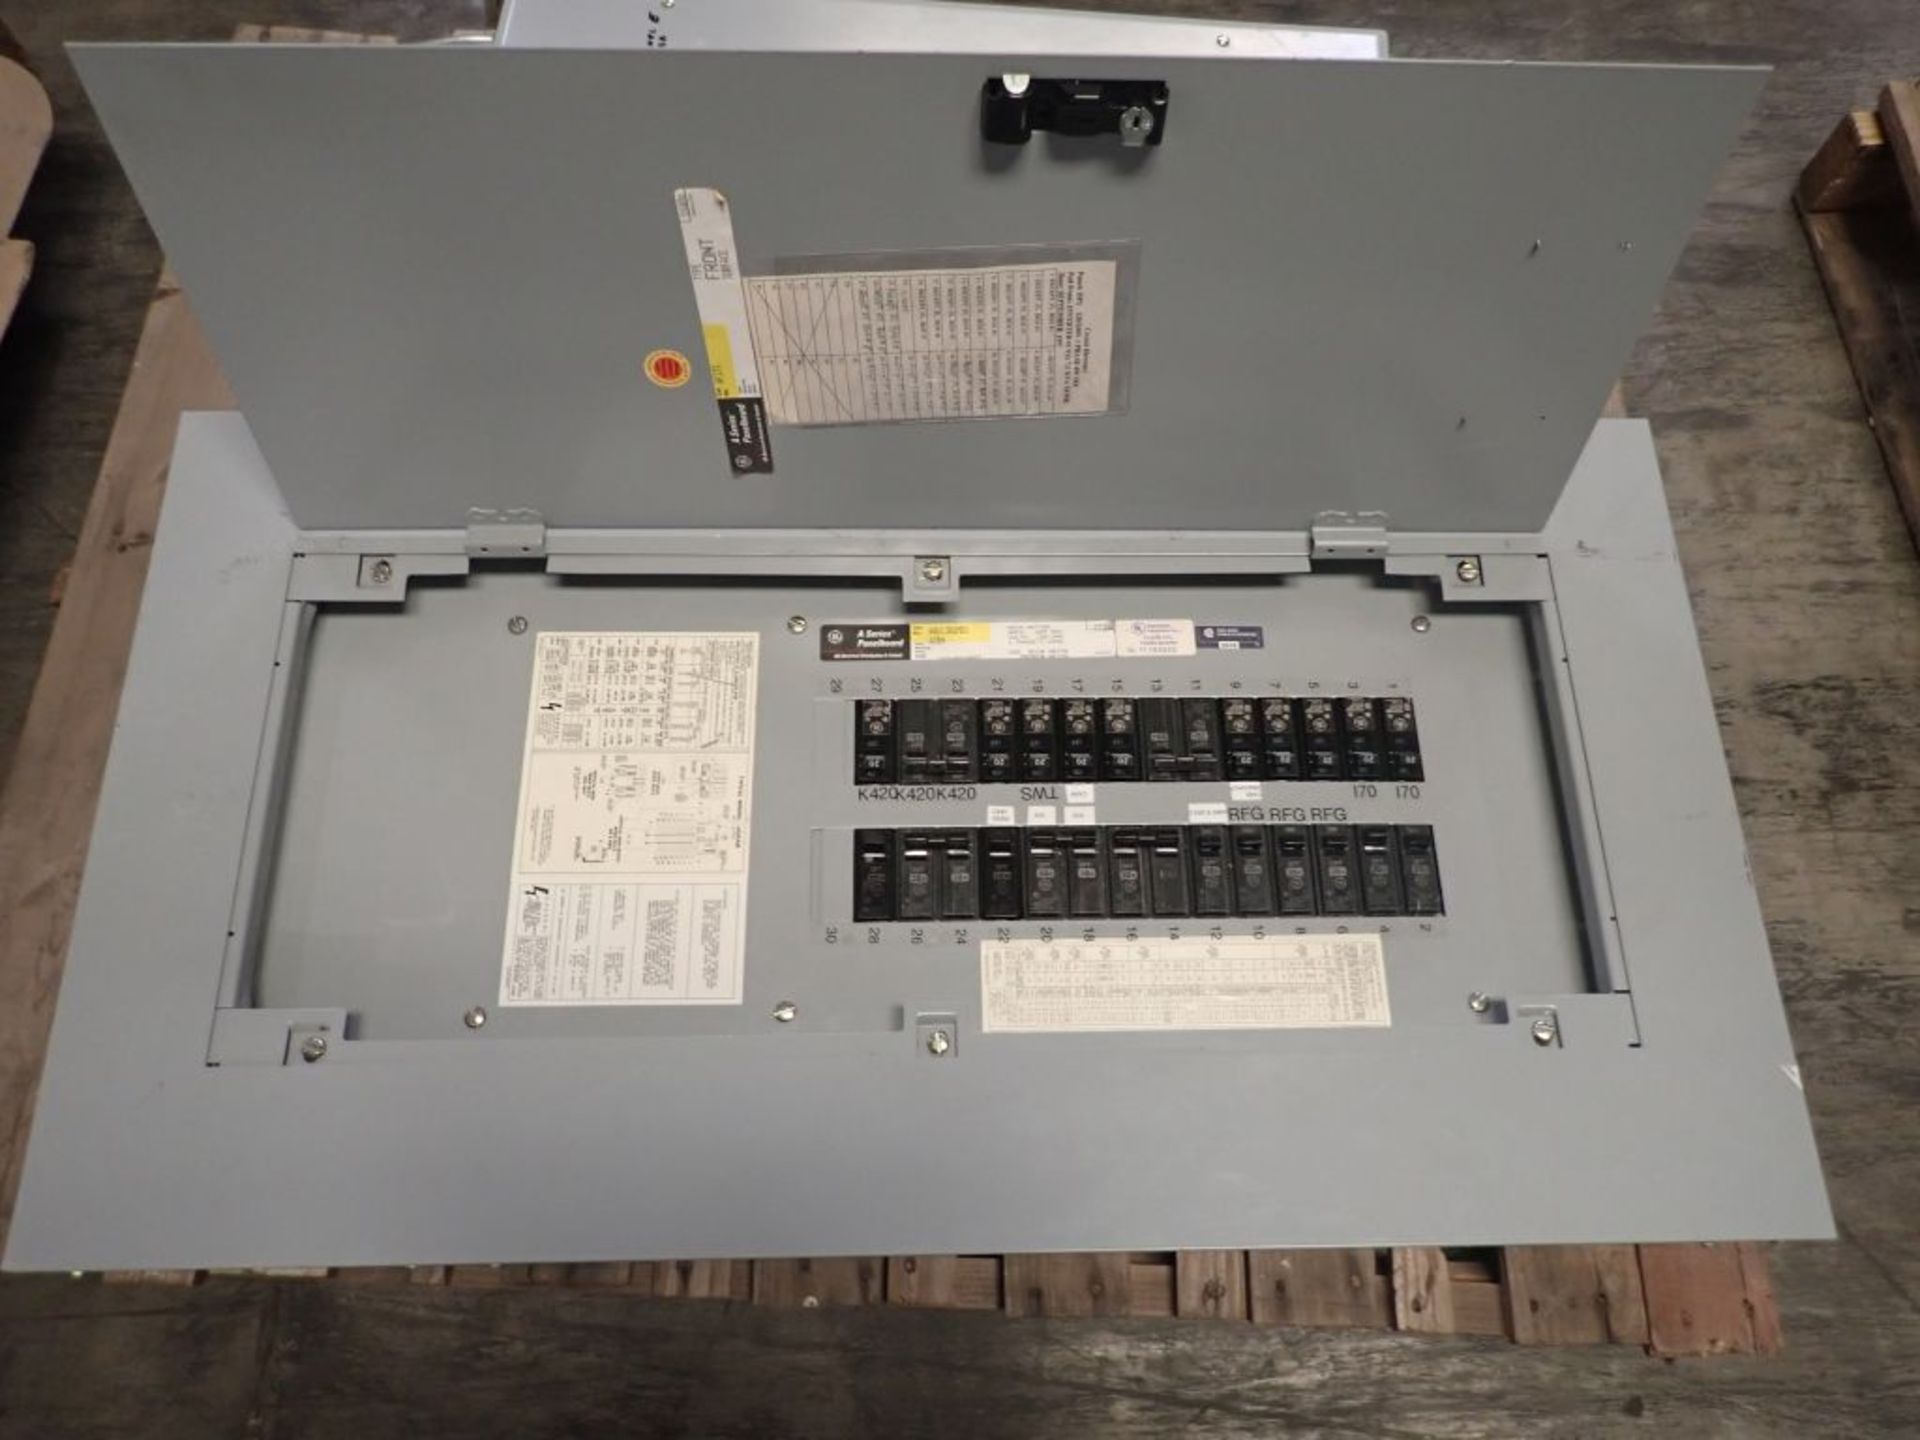 Spartanburg, SC - General Electric A Series Panelboard - Image 2 of 11